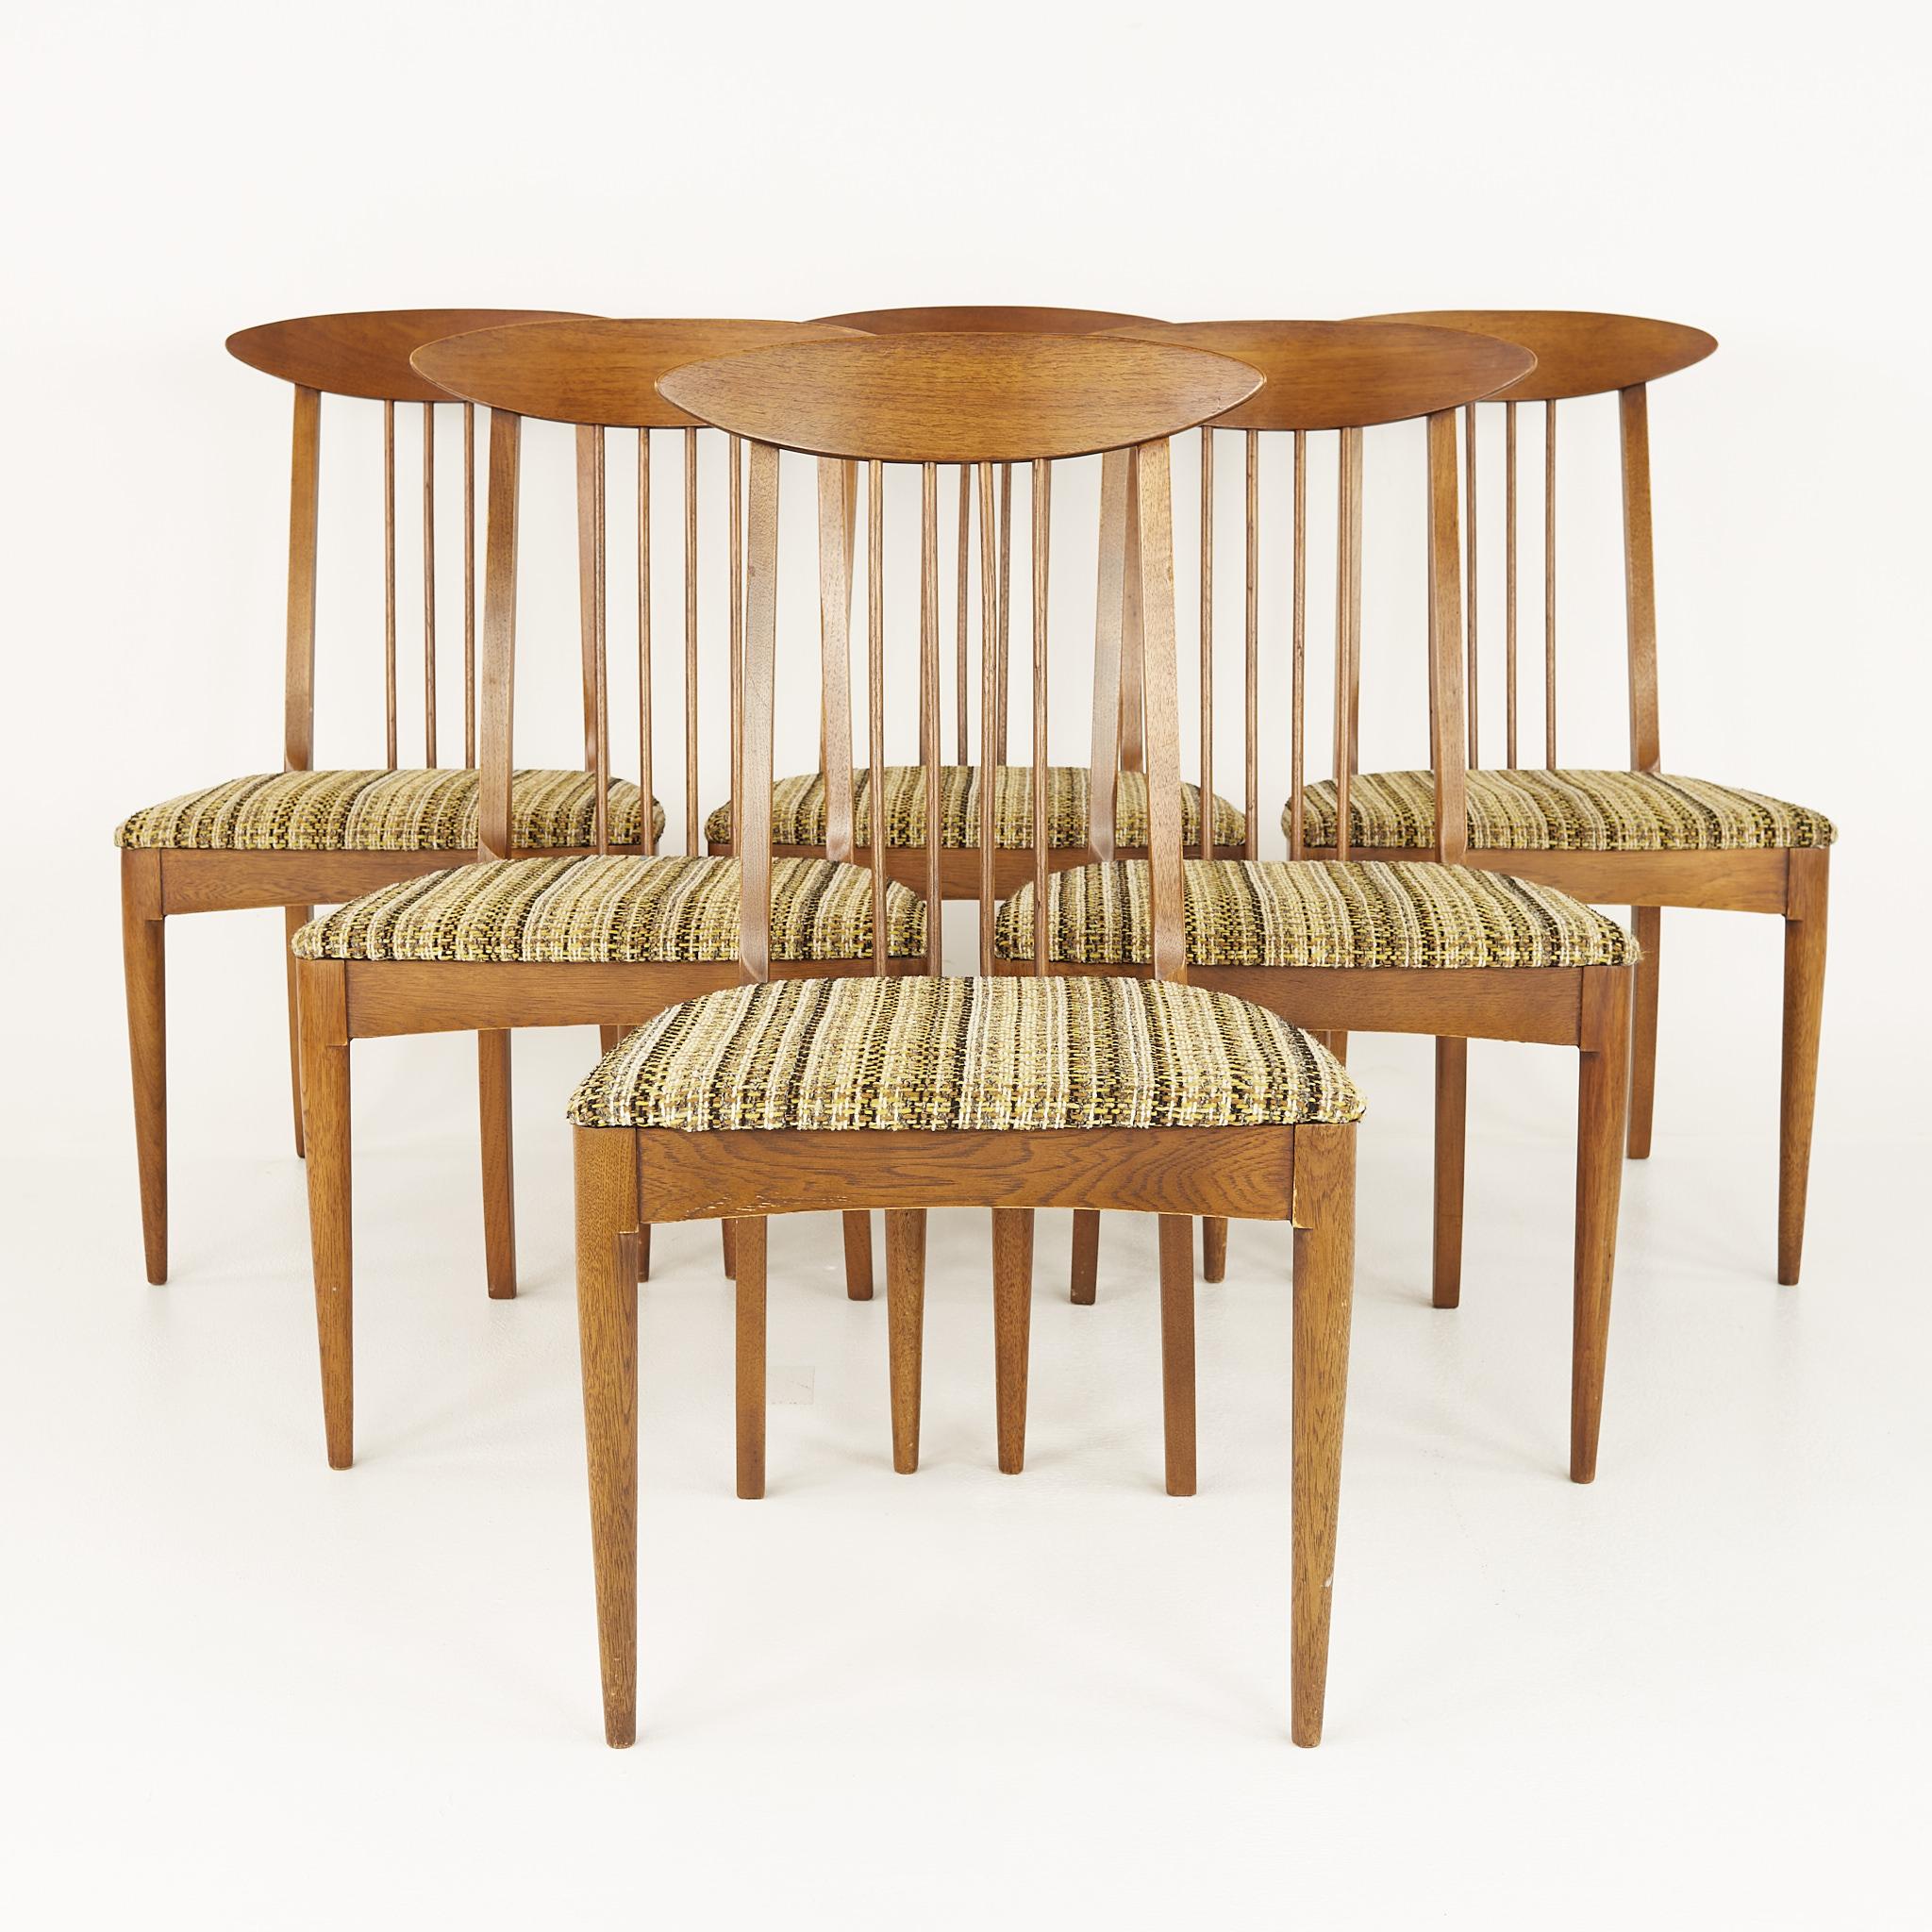 Broyhill sculptra walnut cat's eye dining chairs - set of 6 - no captains chairs

These chairs measure: 20.5 wide x 21.5 deep x 36 inches high, with a seat height of 17.5 inches

?All pieces of furniture can be had in what we call restored